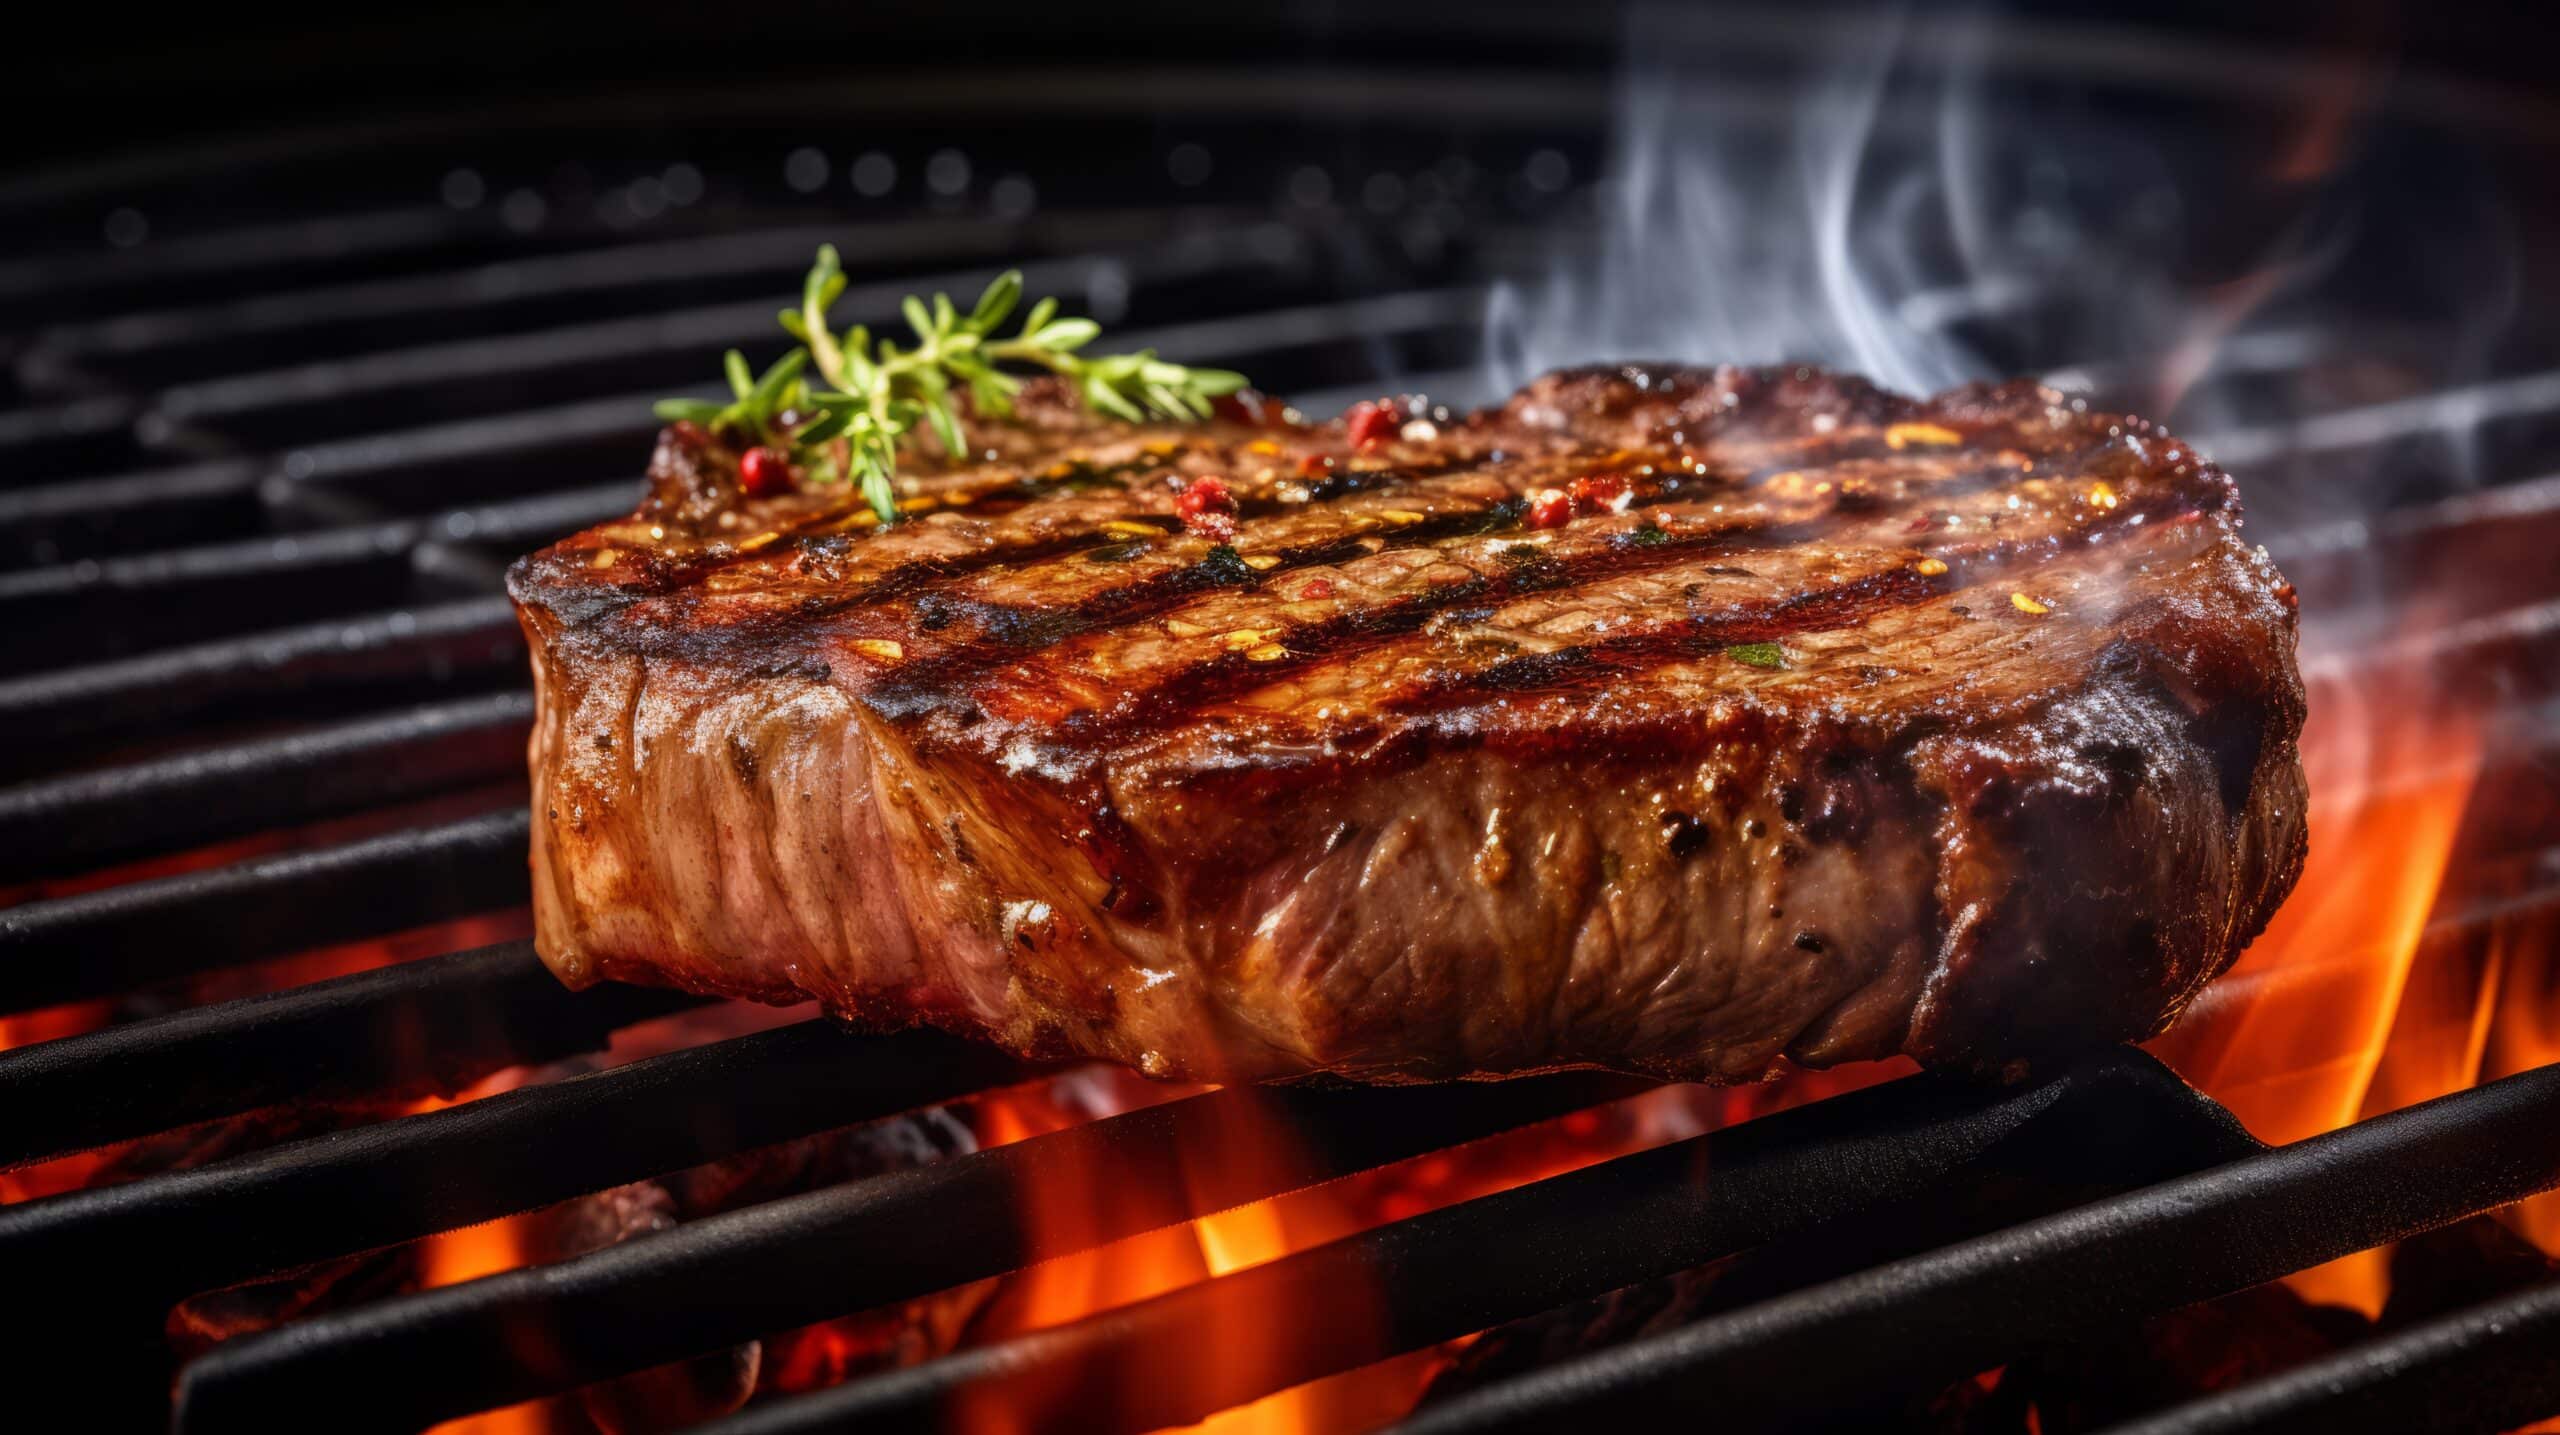 www.appr.com : How Long To Grill Steaks On A Gas Grill?